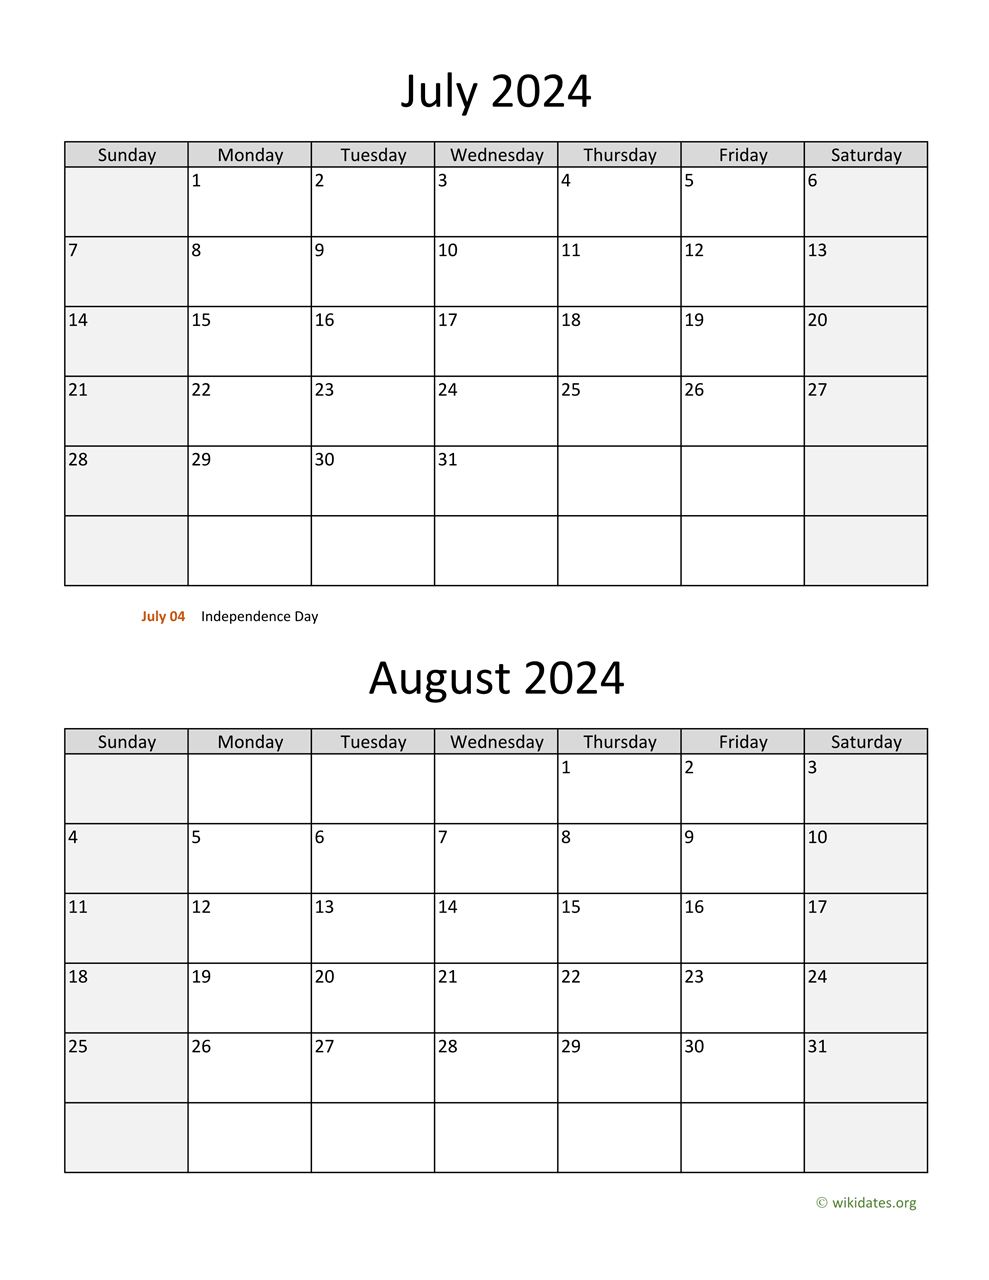 July And August 2024 Calendar | Wikidates for July And August 2024 Calendar Printable